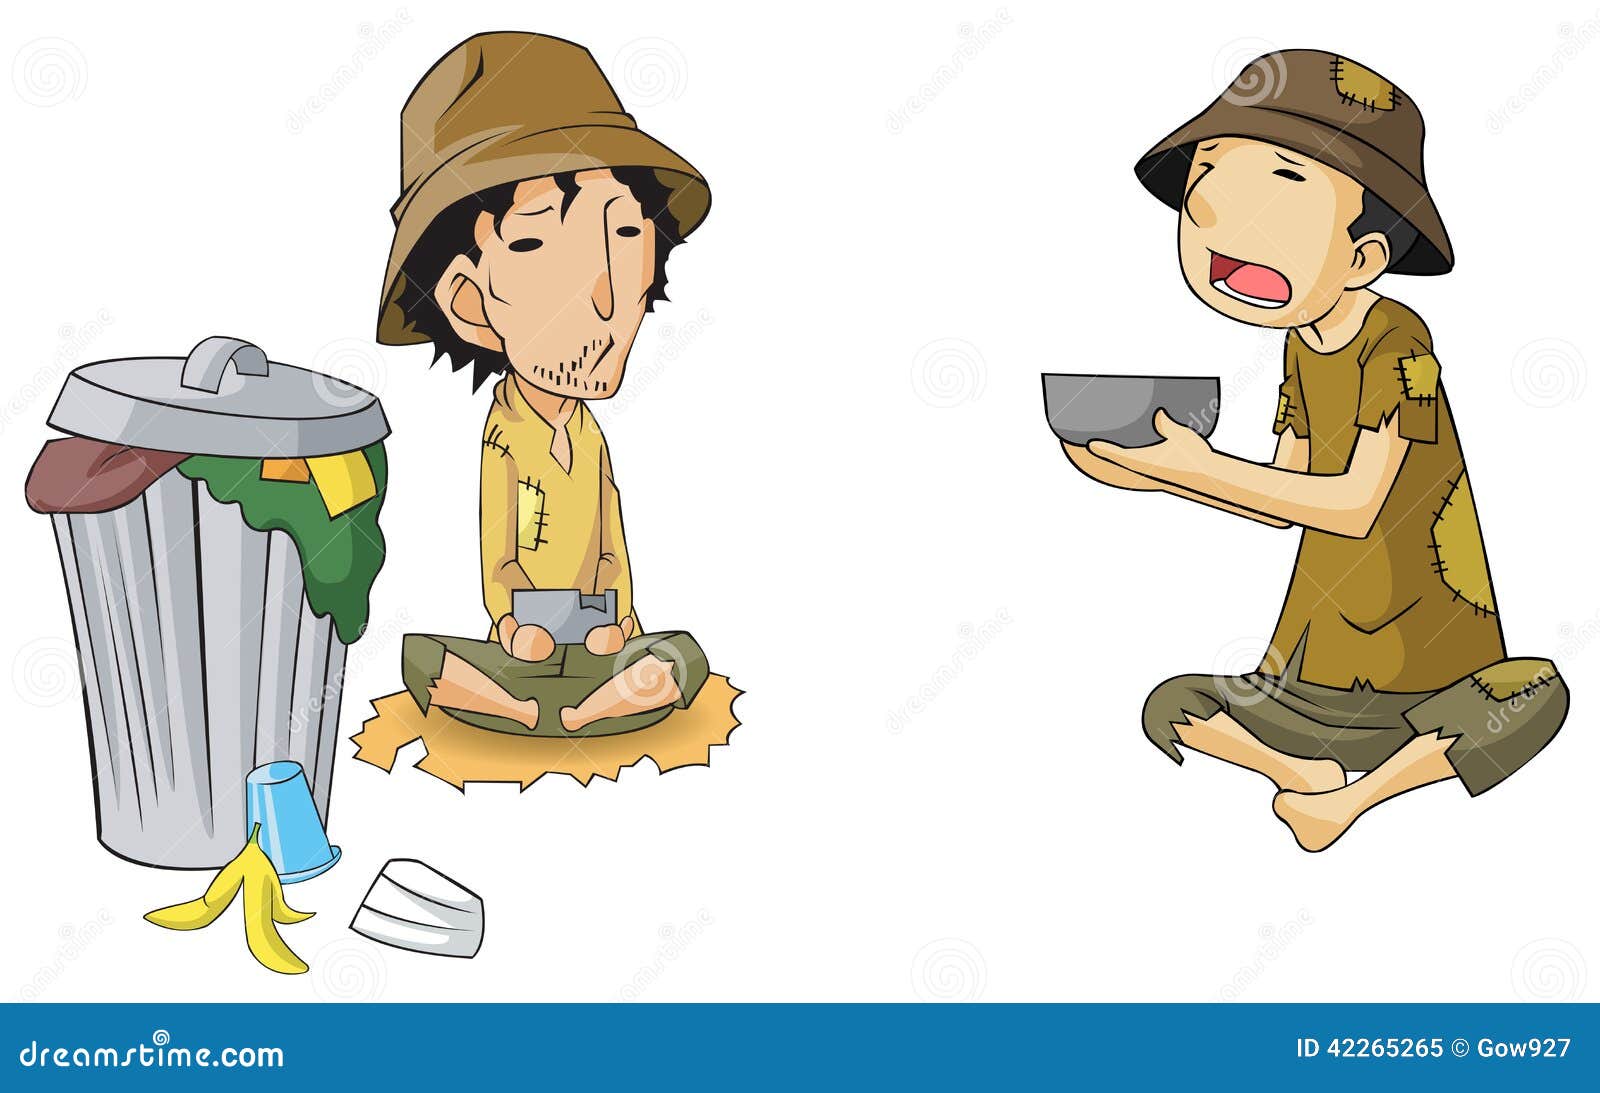 clipart poverty pictures - photo #35